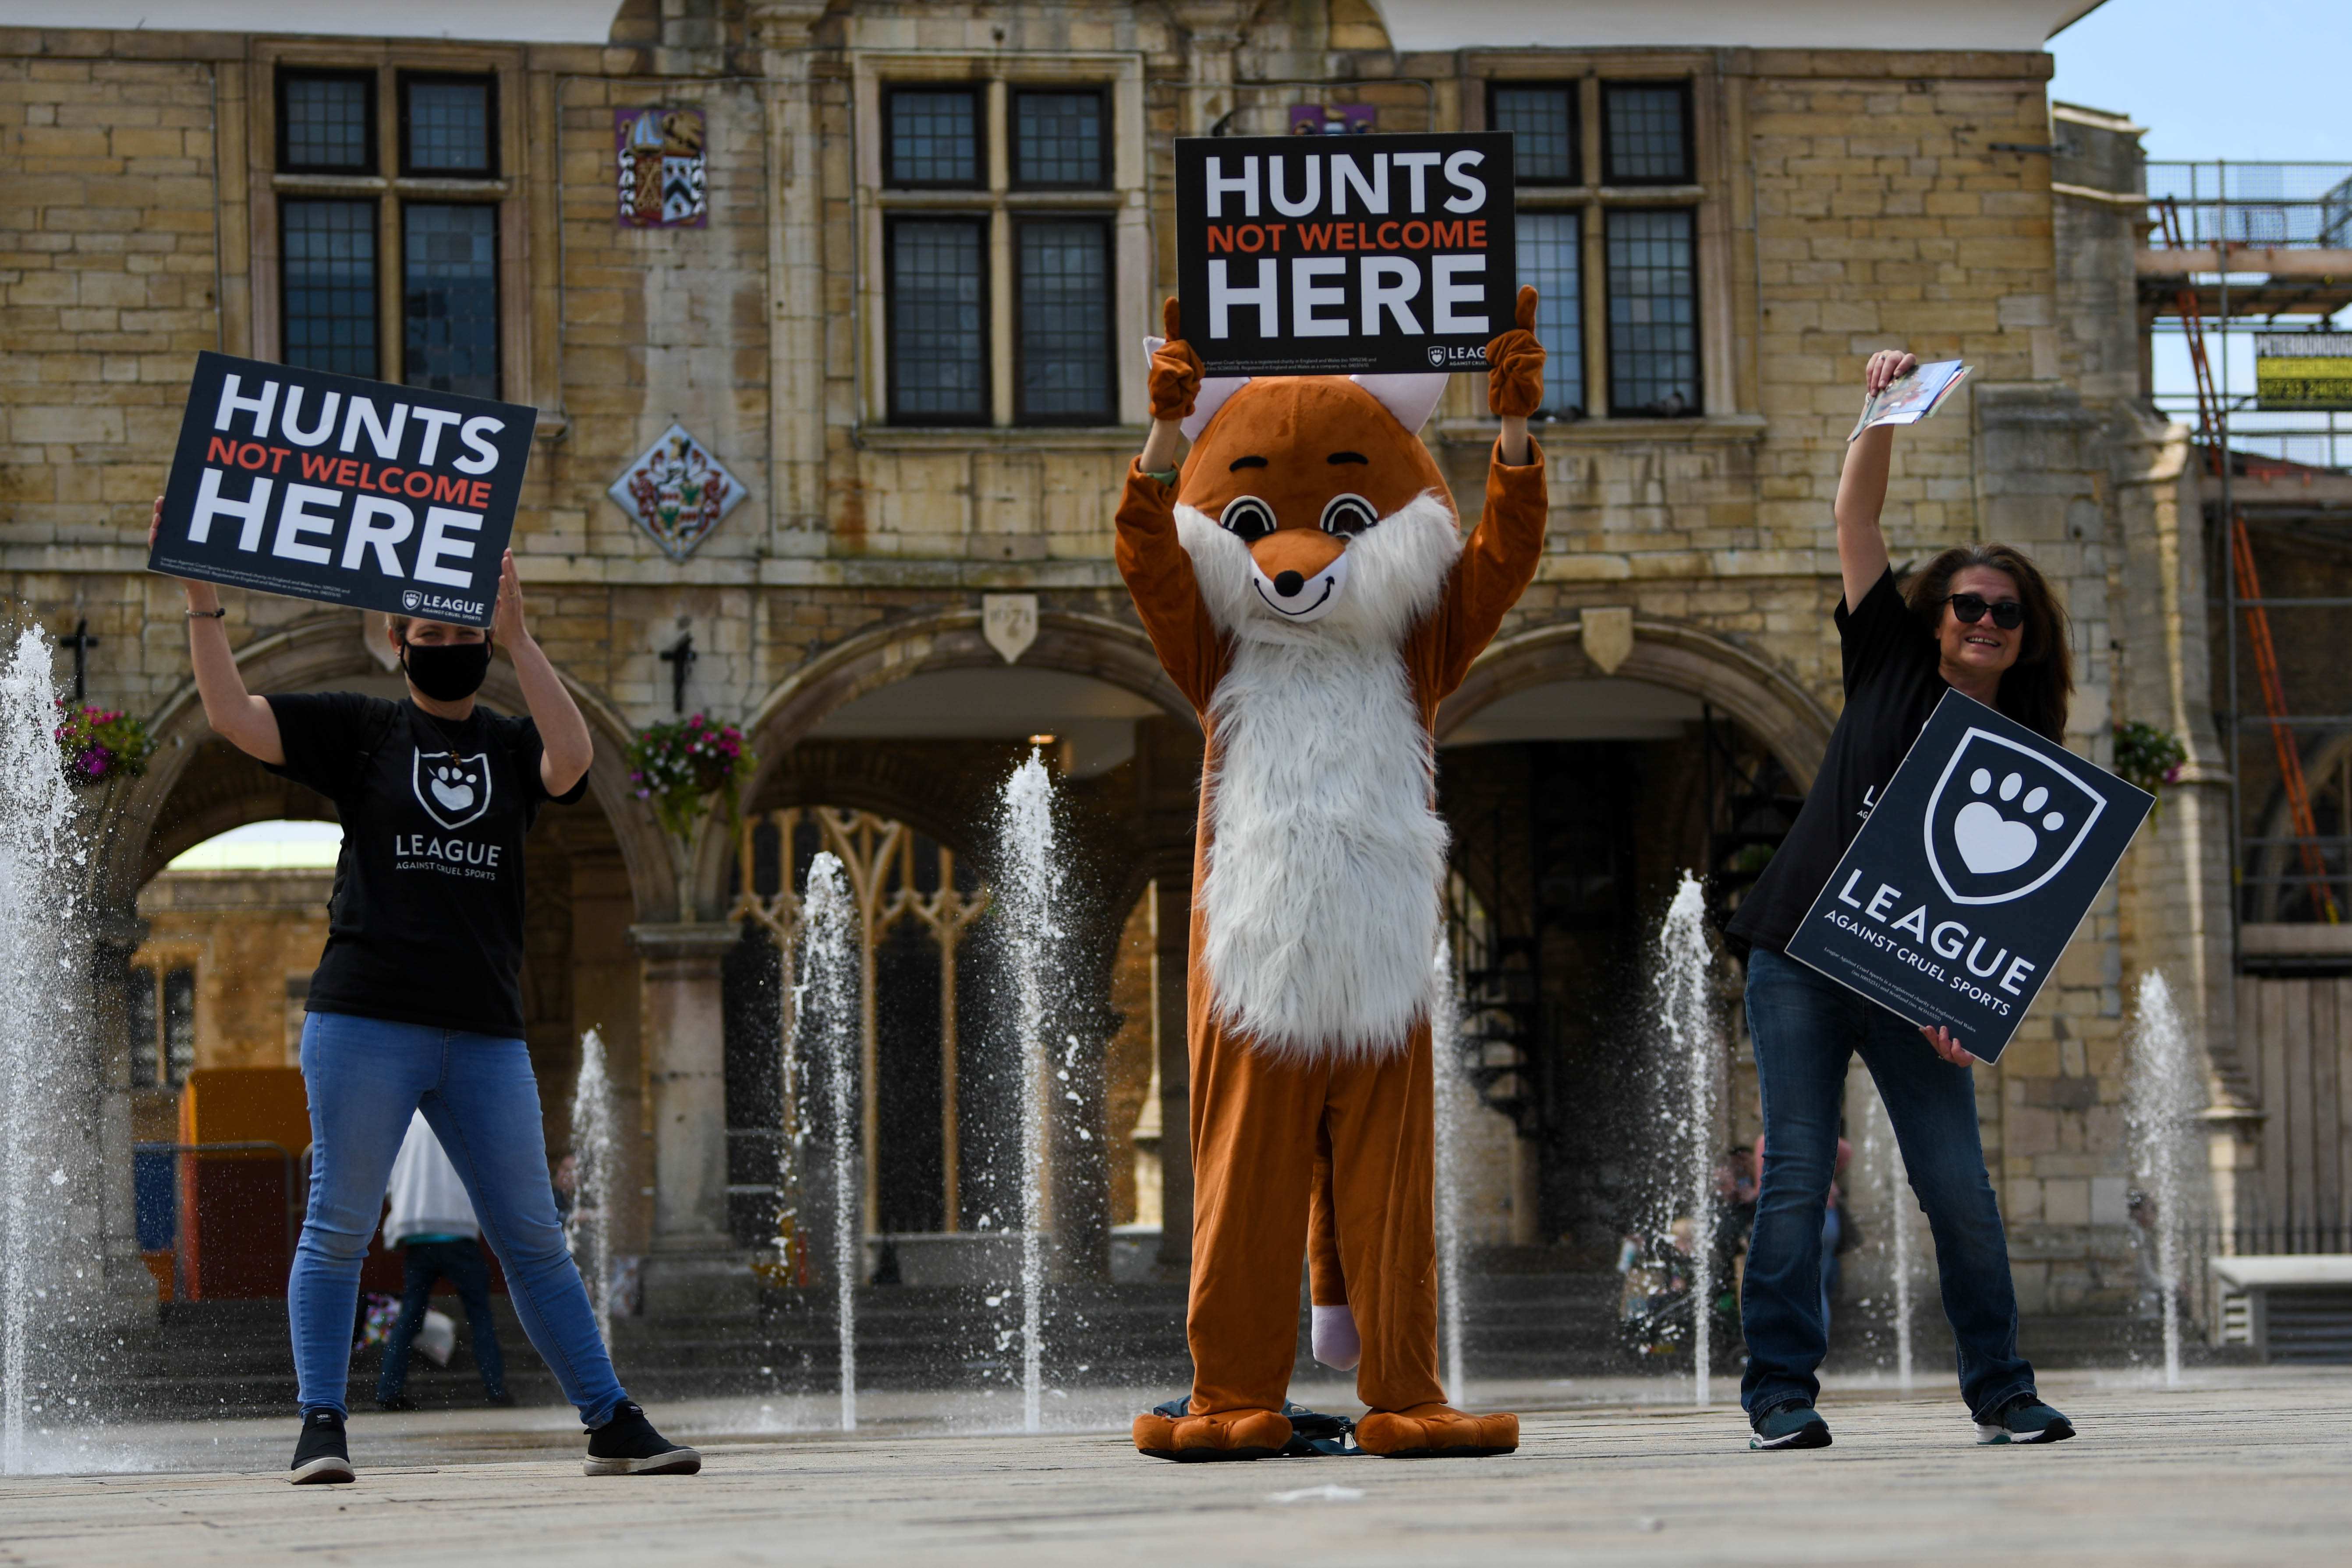 Hunts are not welcome here